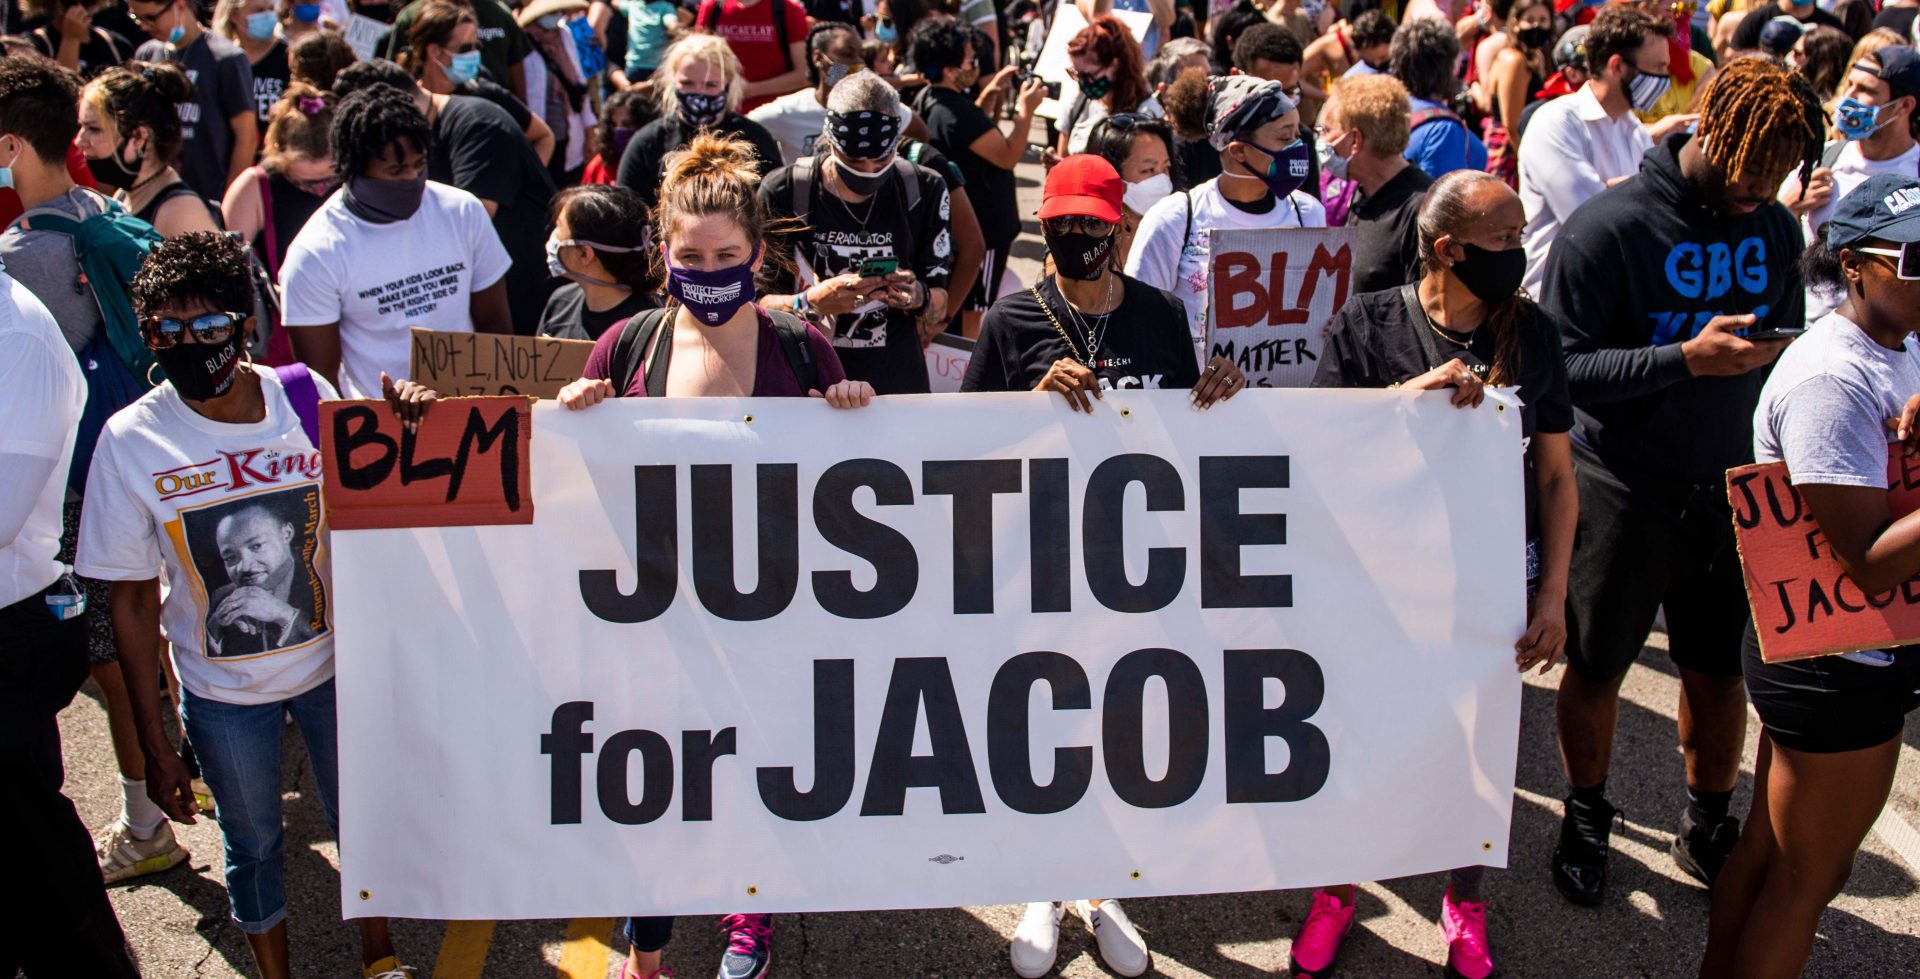 Protesters march with the family of Jacob Blake during a rally against racism and police brutality in Kenosha, Wisconsin, on August 29, 2020.